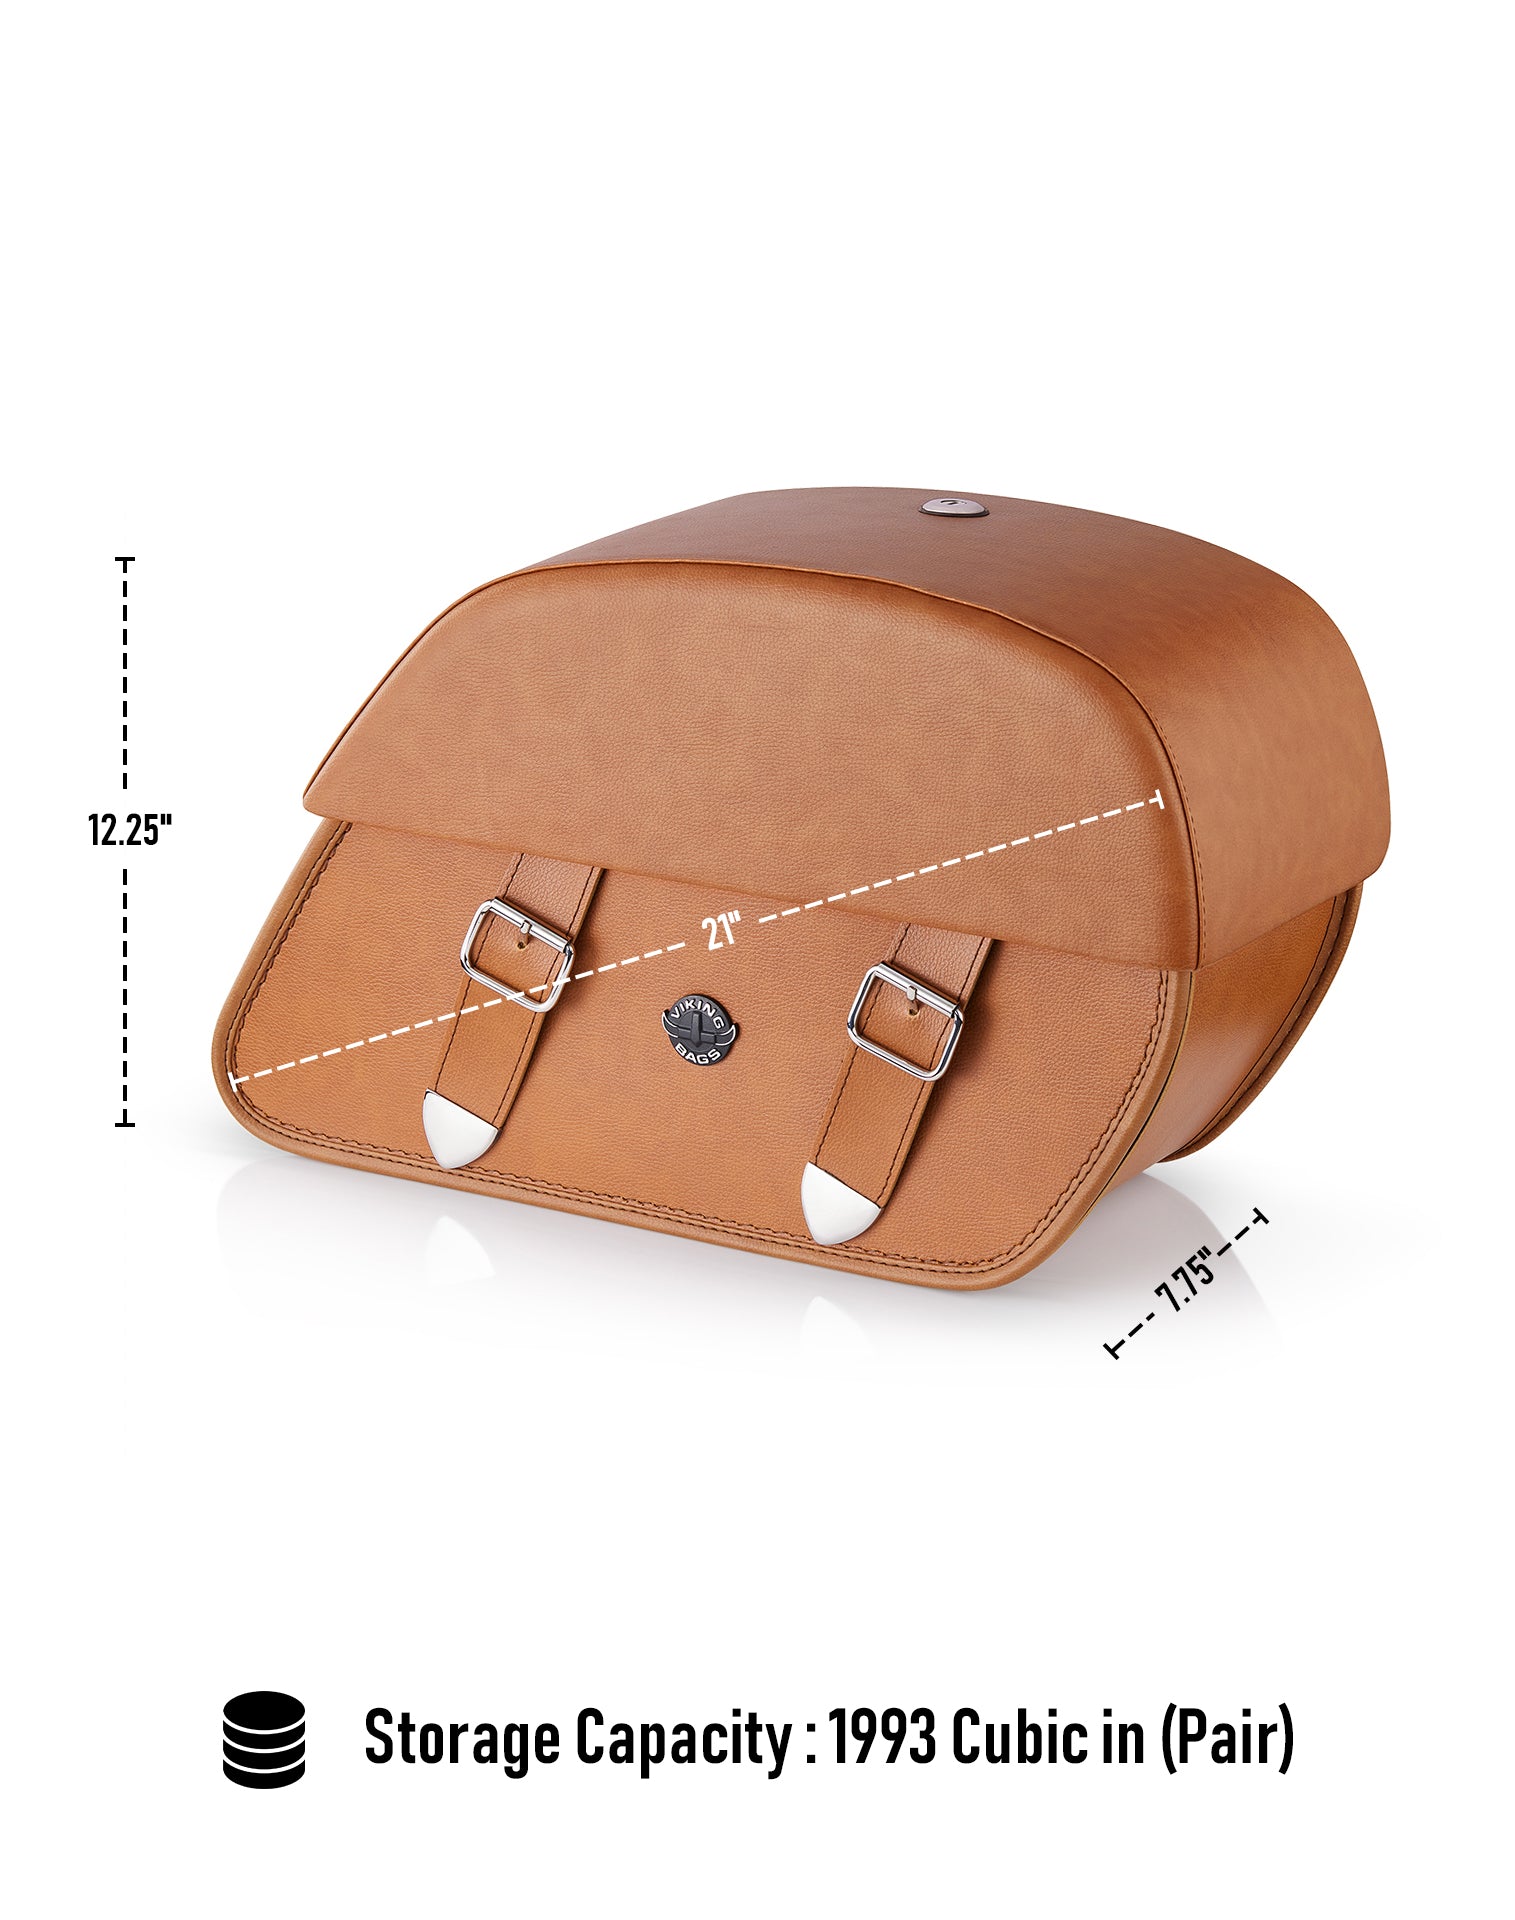 33L - Baelor Brown Large Leather Motorcycle Saddlebags For Harley Softail Fat Boy Lo FLSTFB